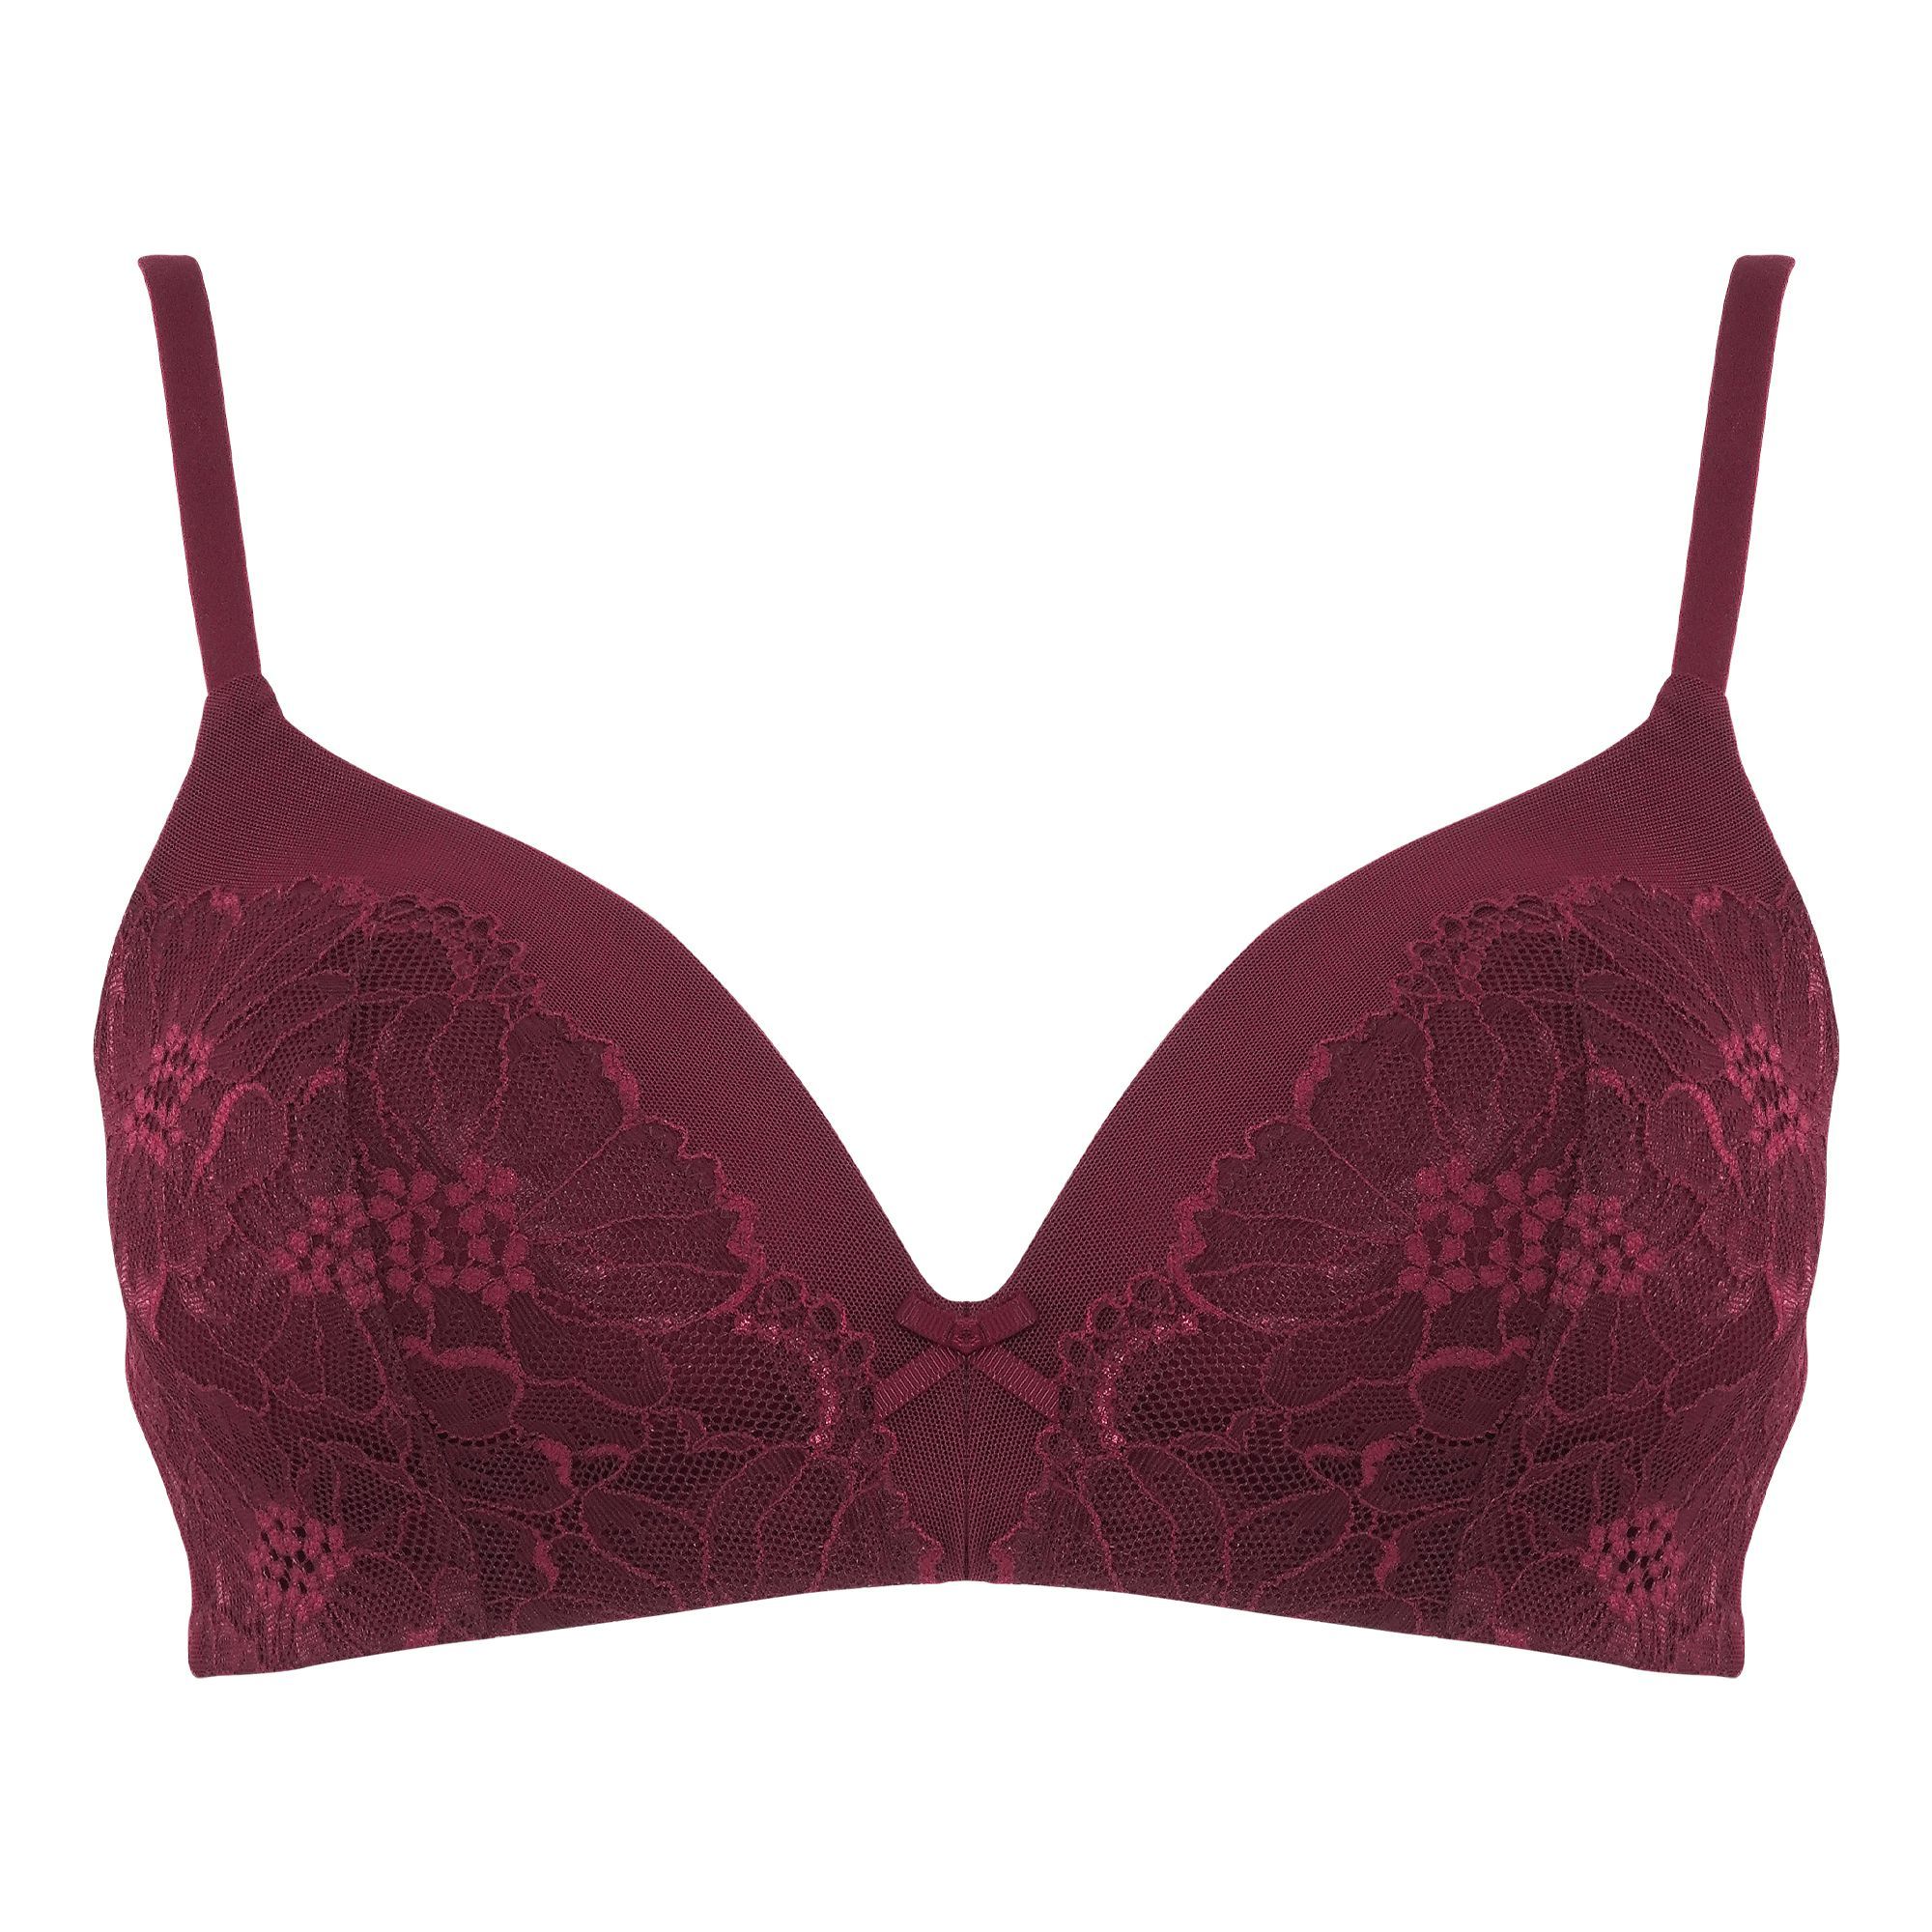 Order IFG Emilia Bra, BGD Online at Special Price in Pakistan - Naheed.pk